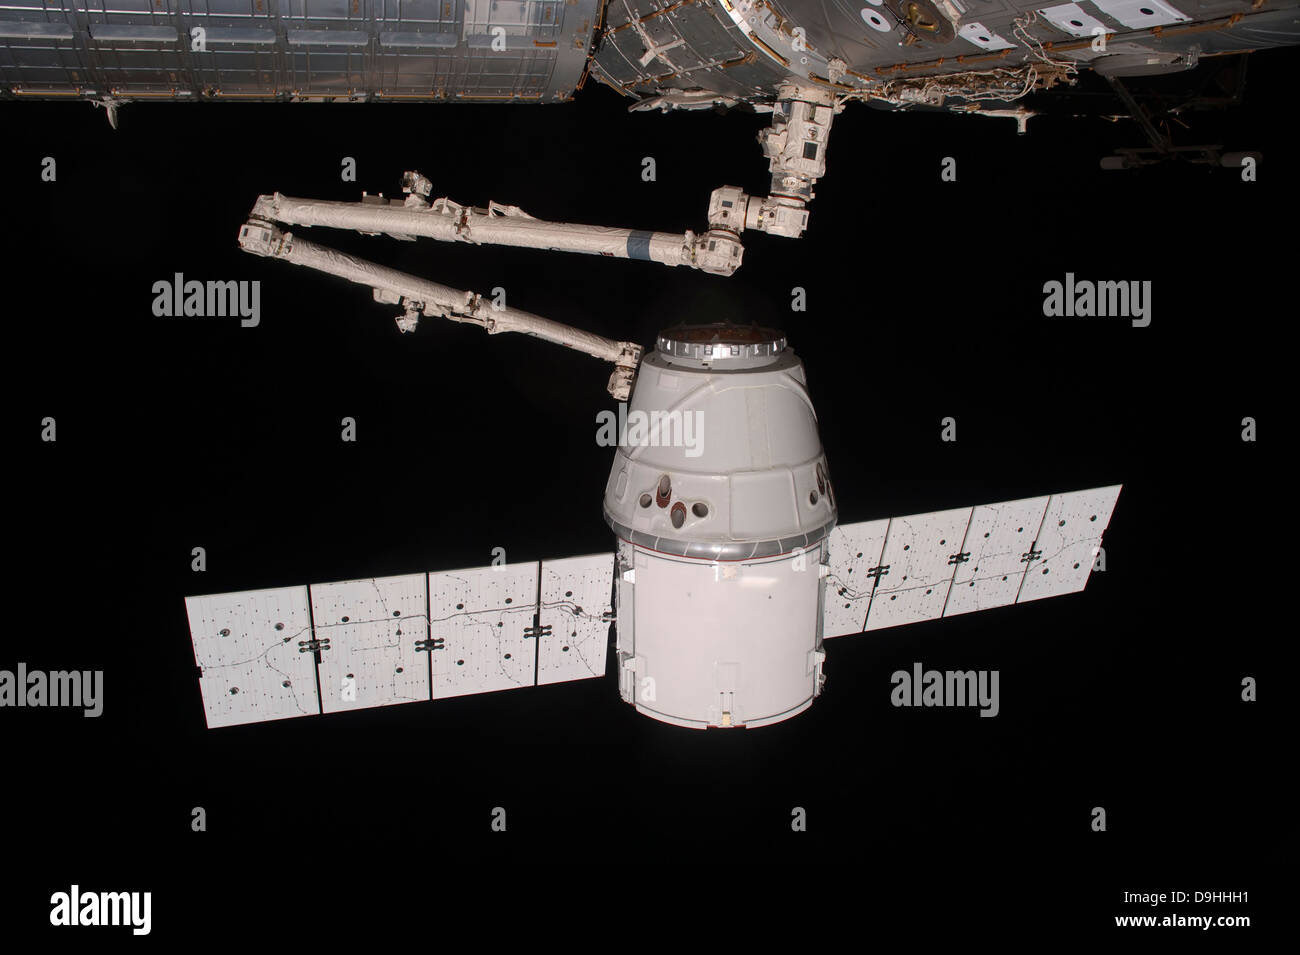 The SpaceX Dragon cargo craft in the grasp of the Candarm2. Stock Photo